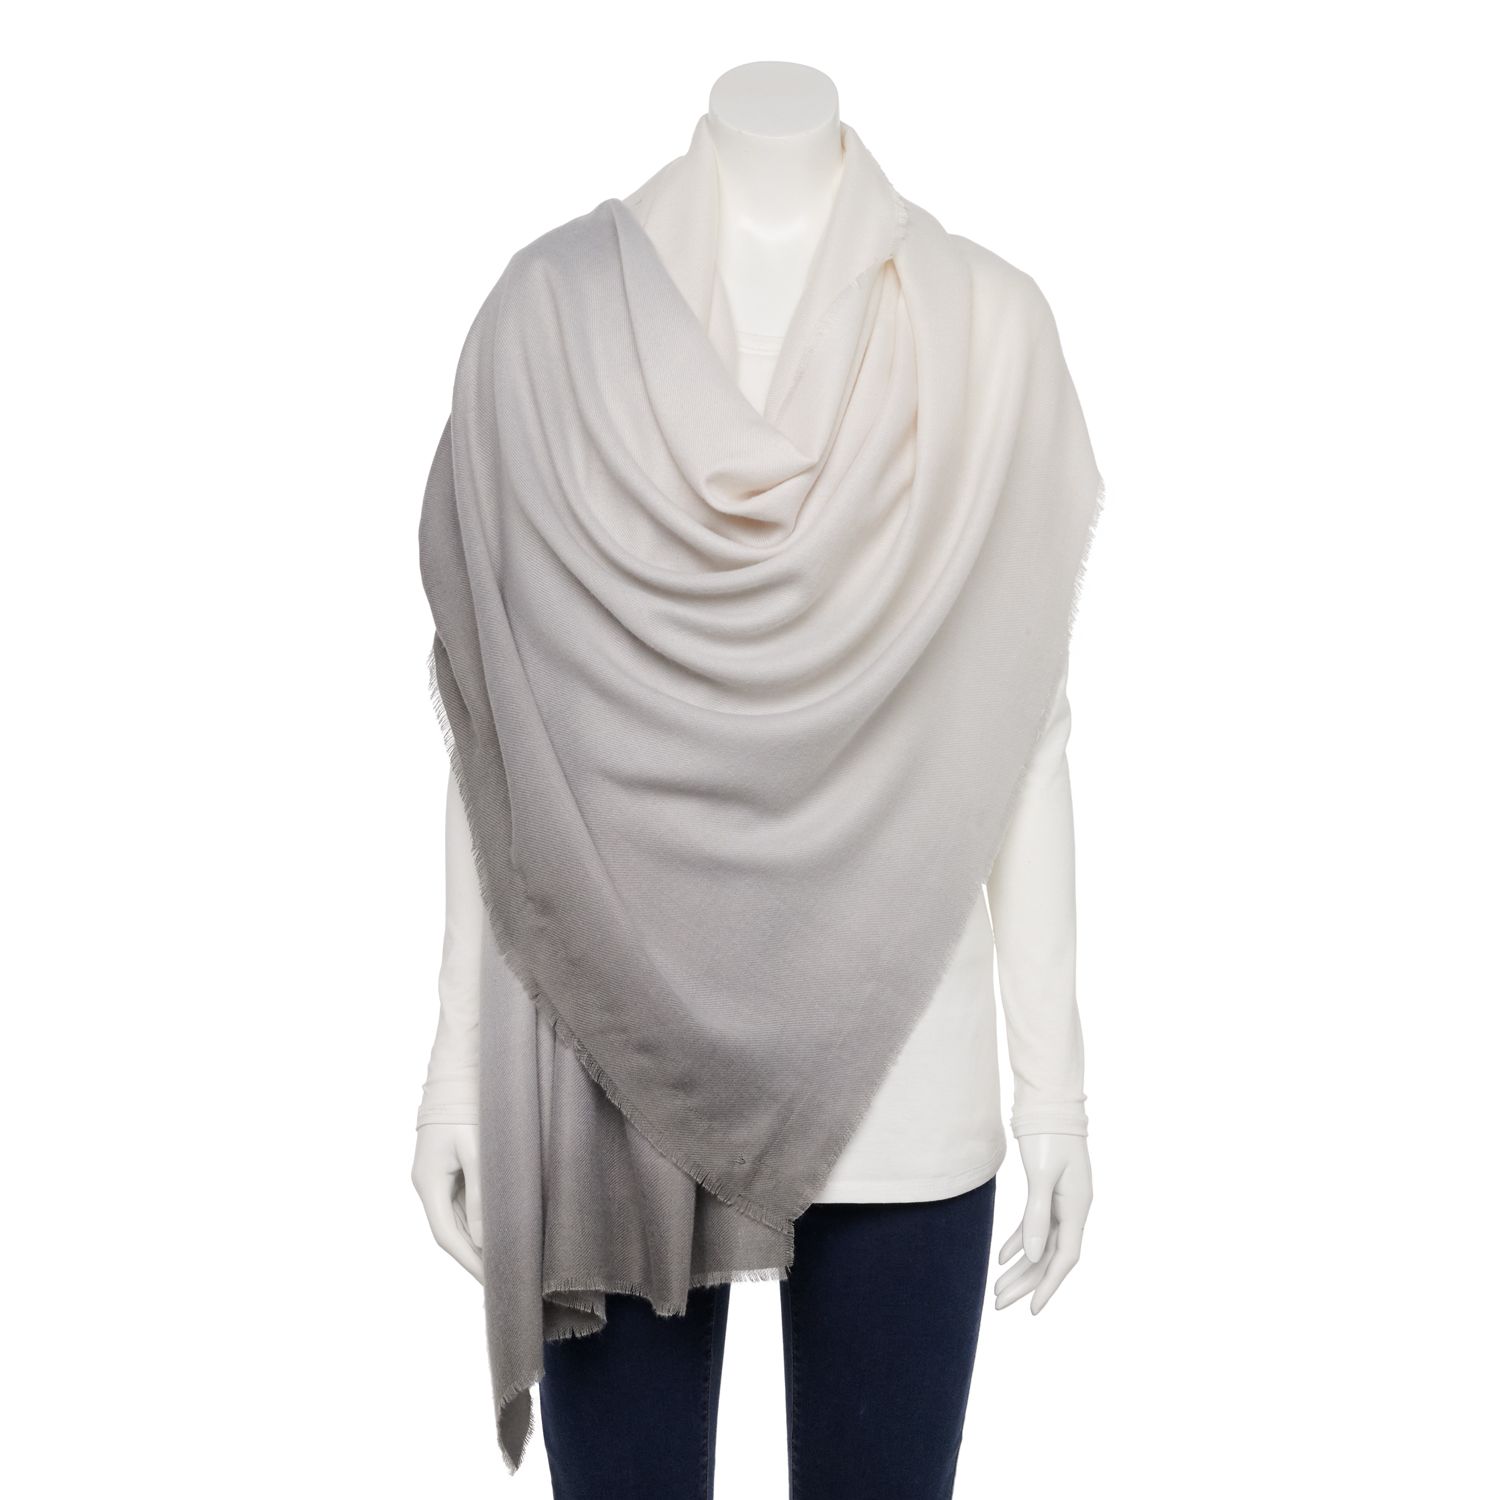 Image for LC Lauren Conrad Women's Ombre Softy Wrap Scarf at Kohl's.